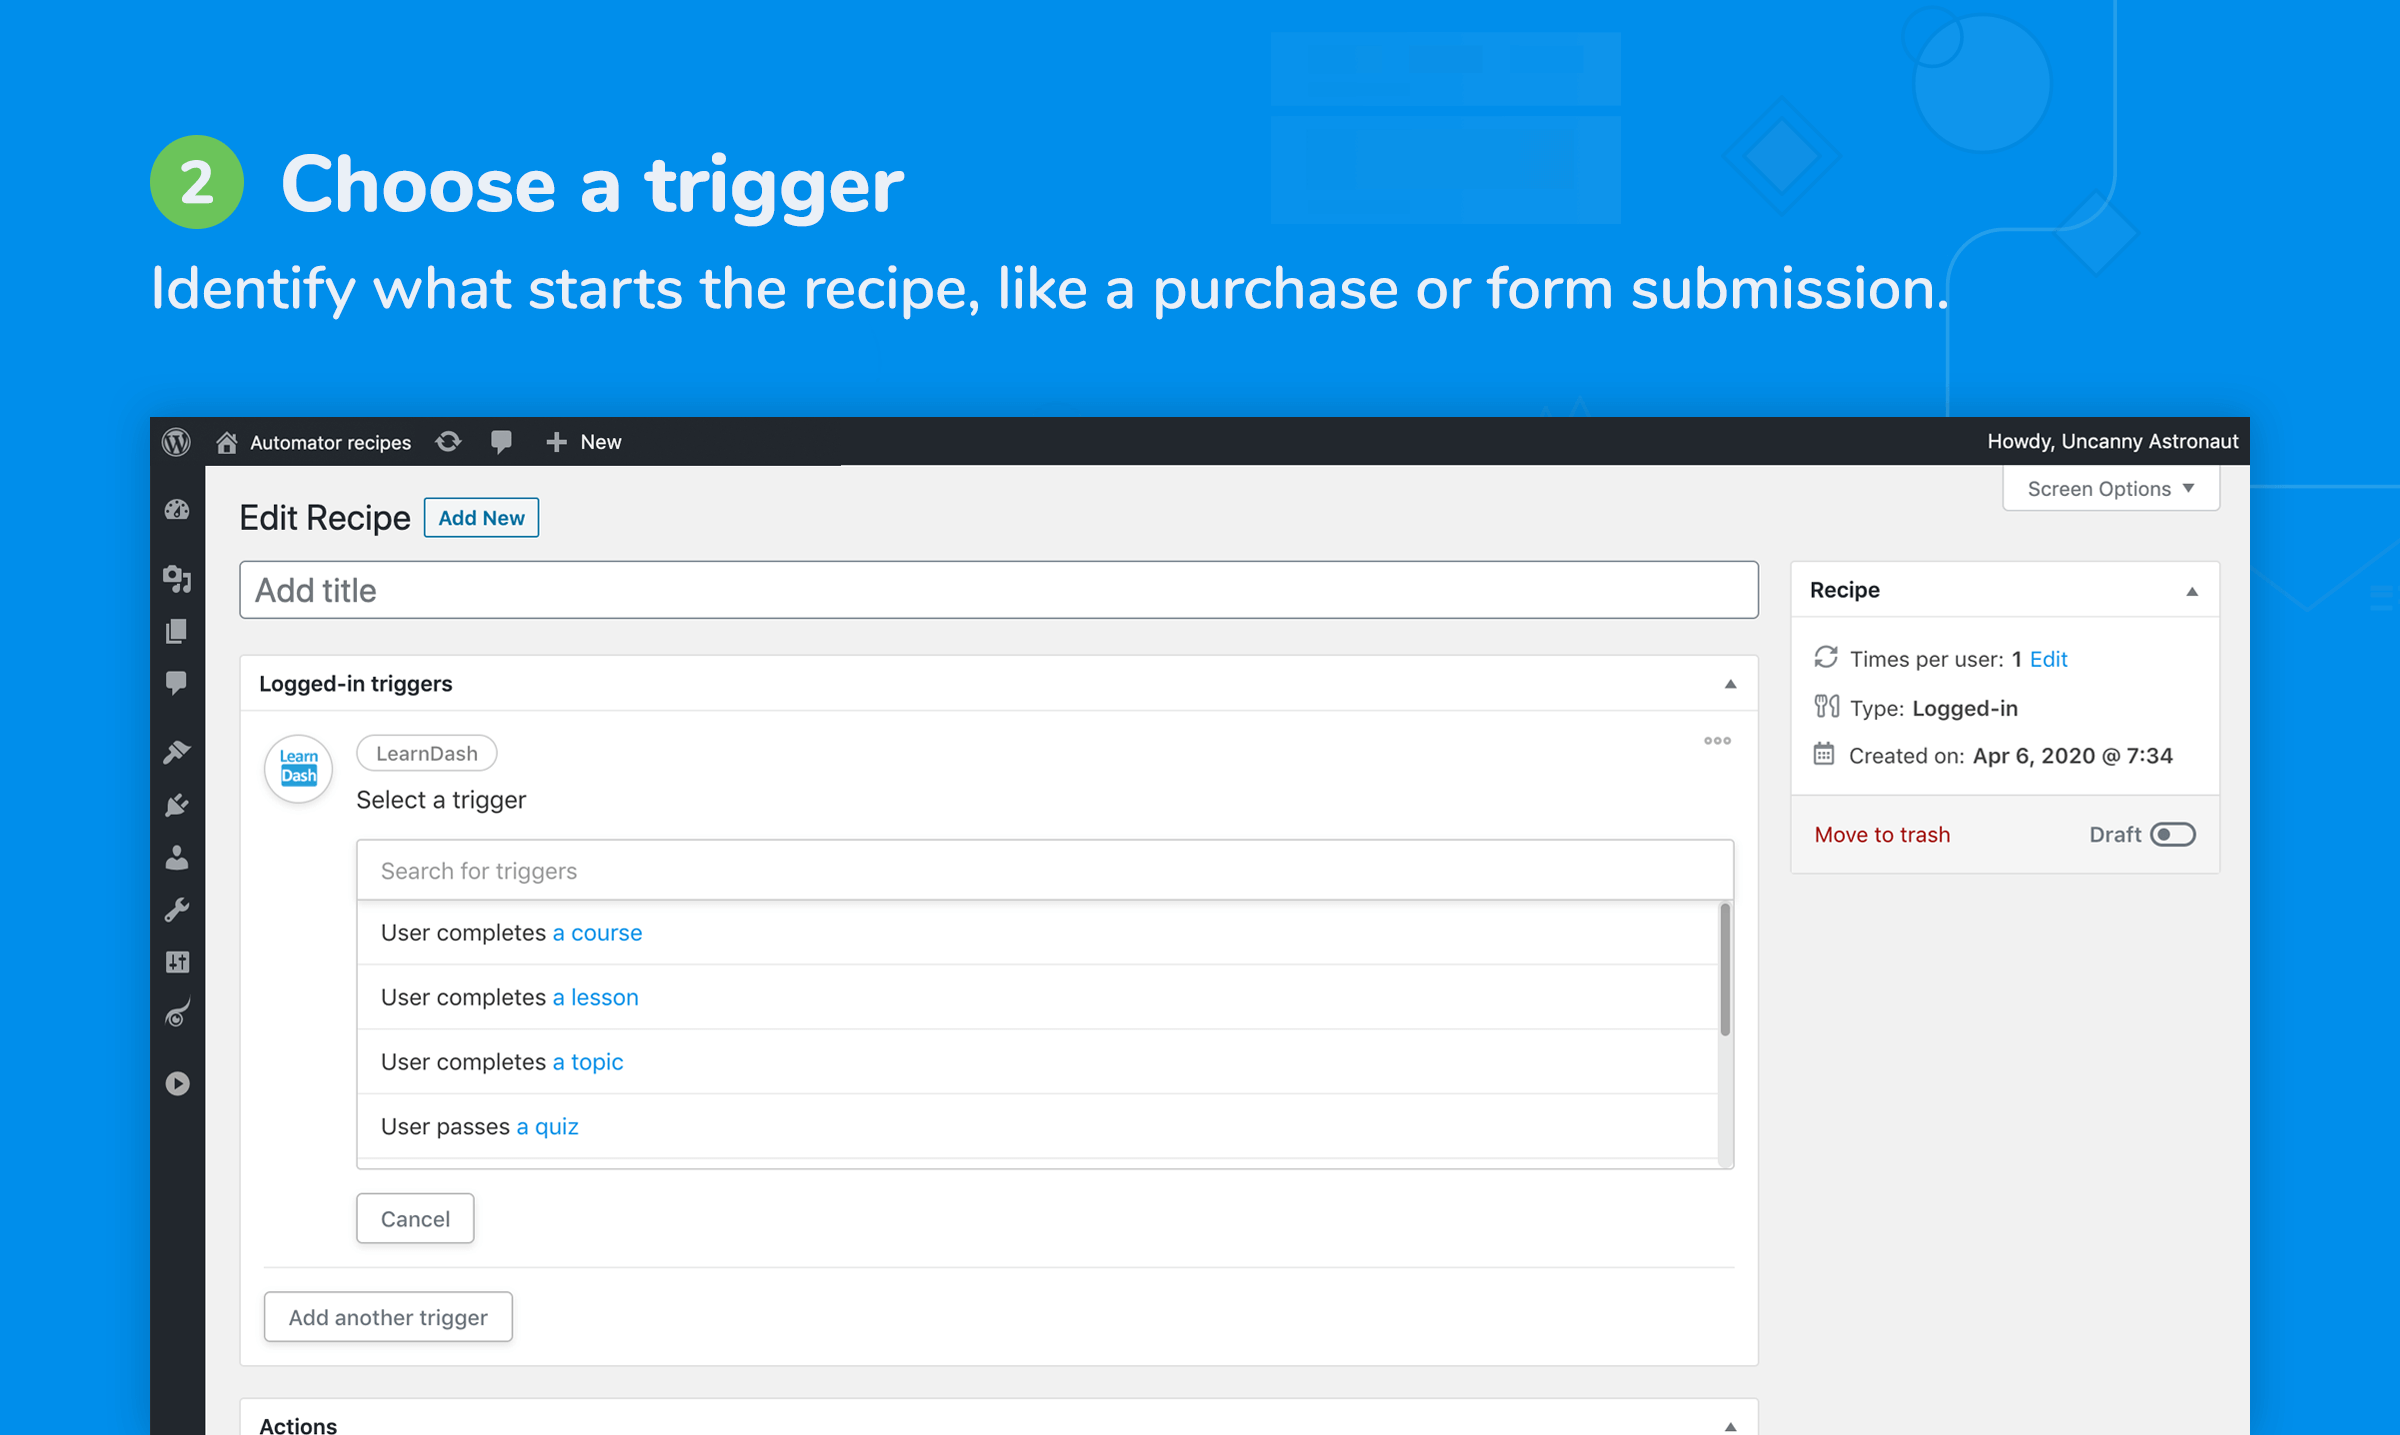 Identify what starts the recipe, like a purchase or form submission